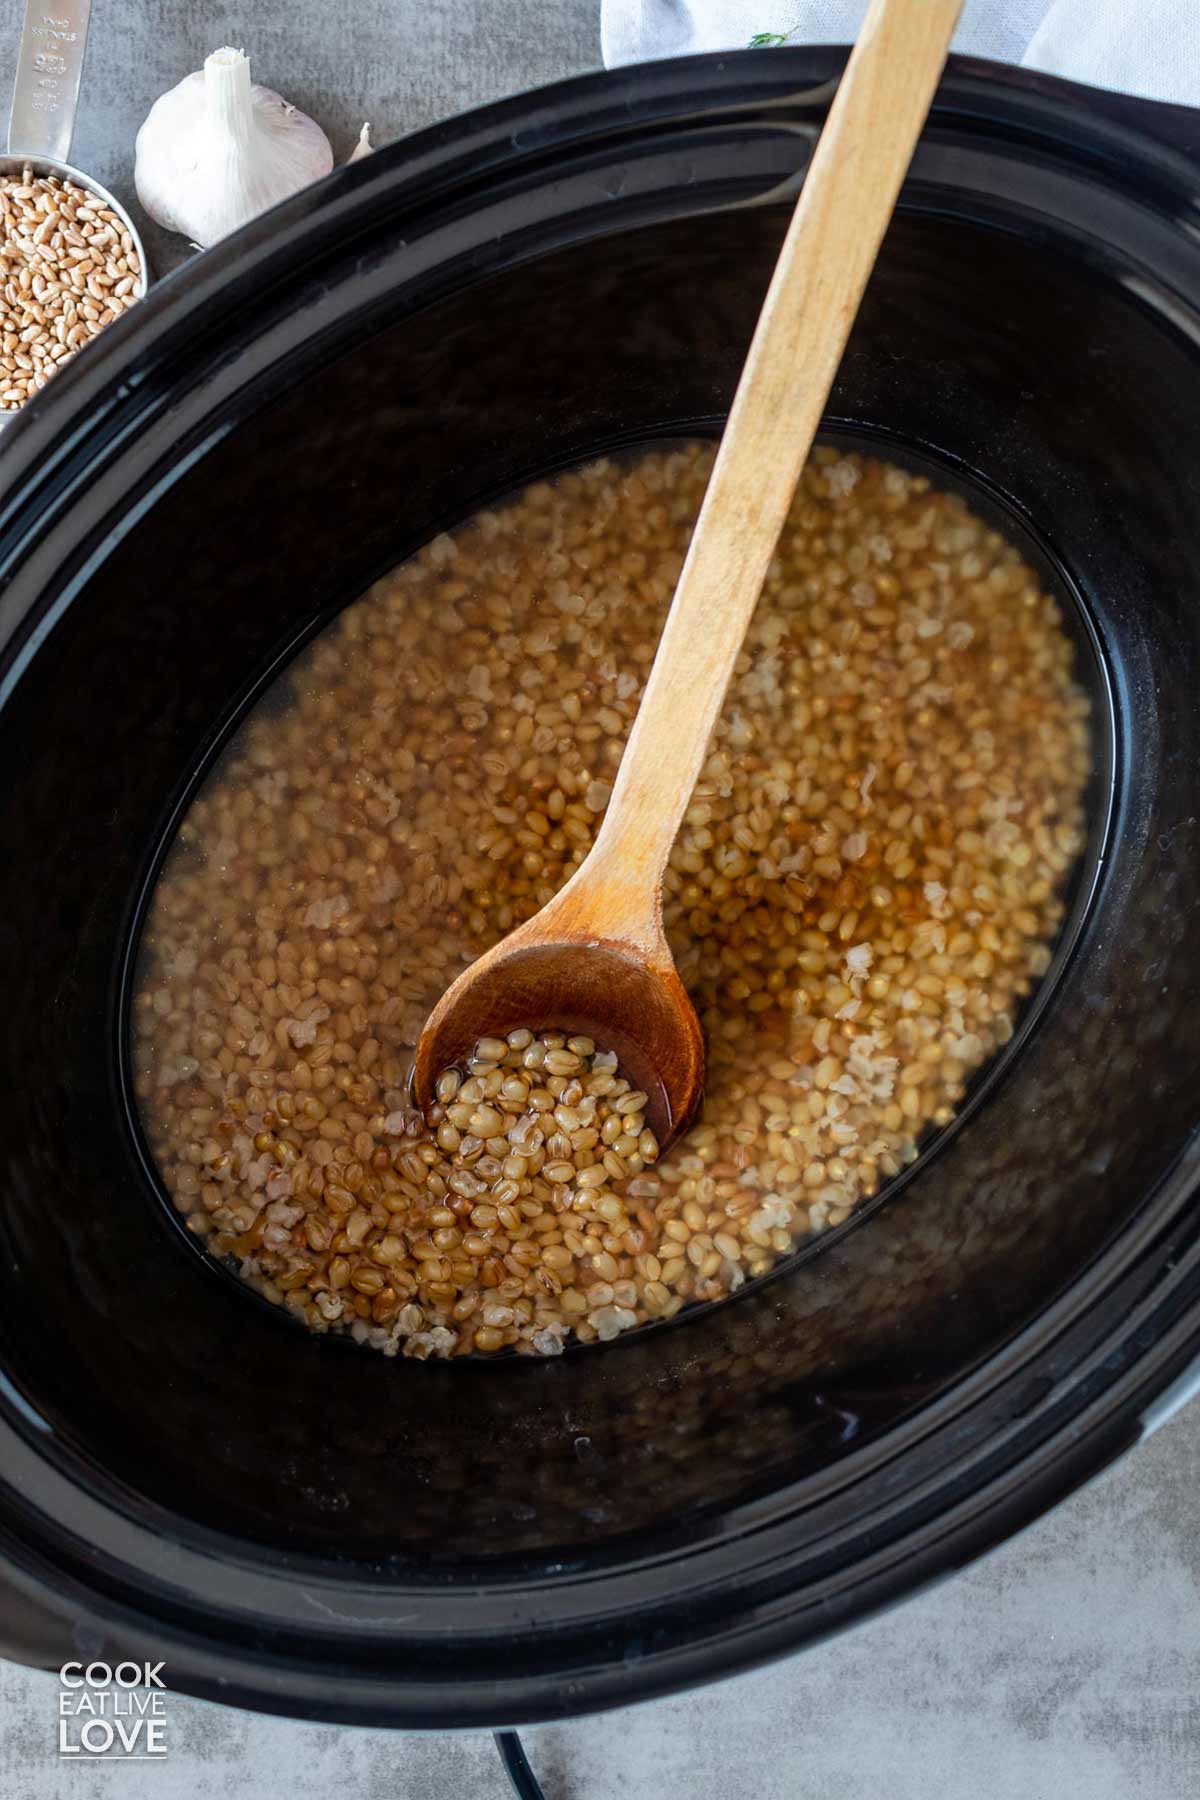 Wheat berries after cooking in a slow cooker.